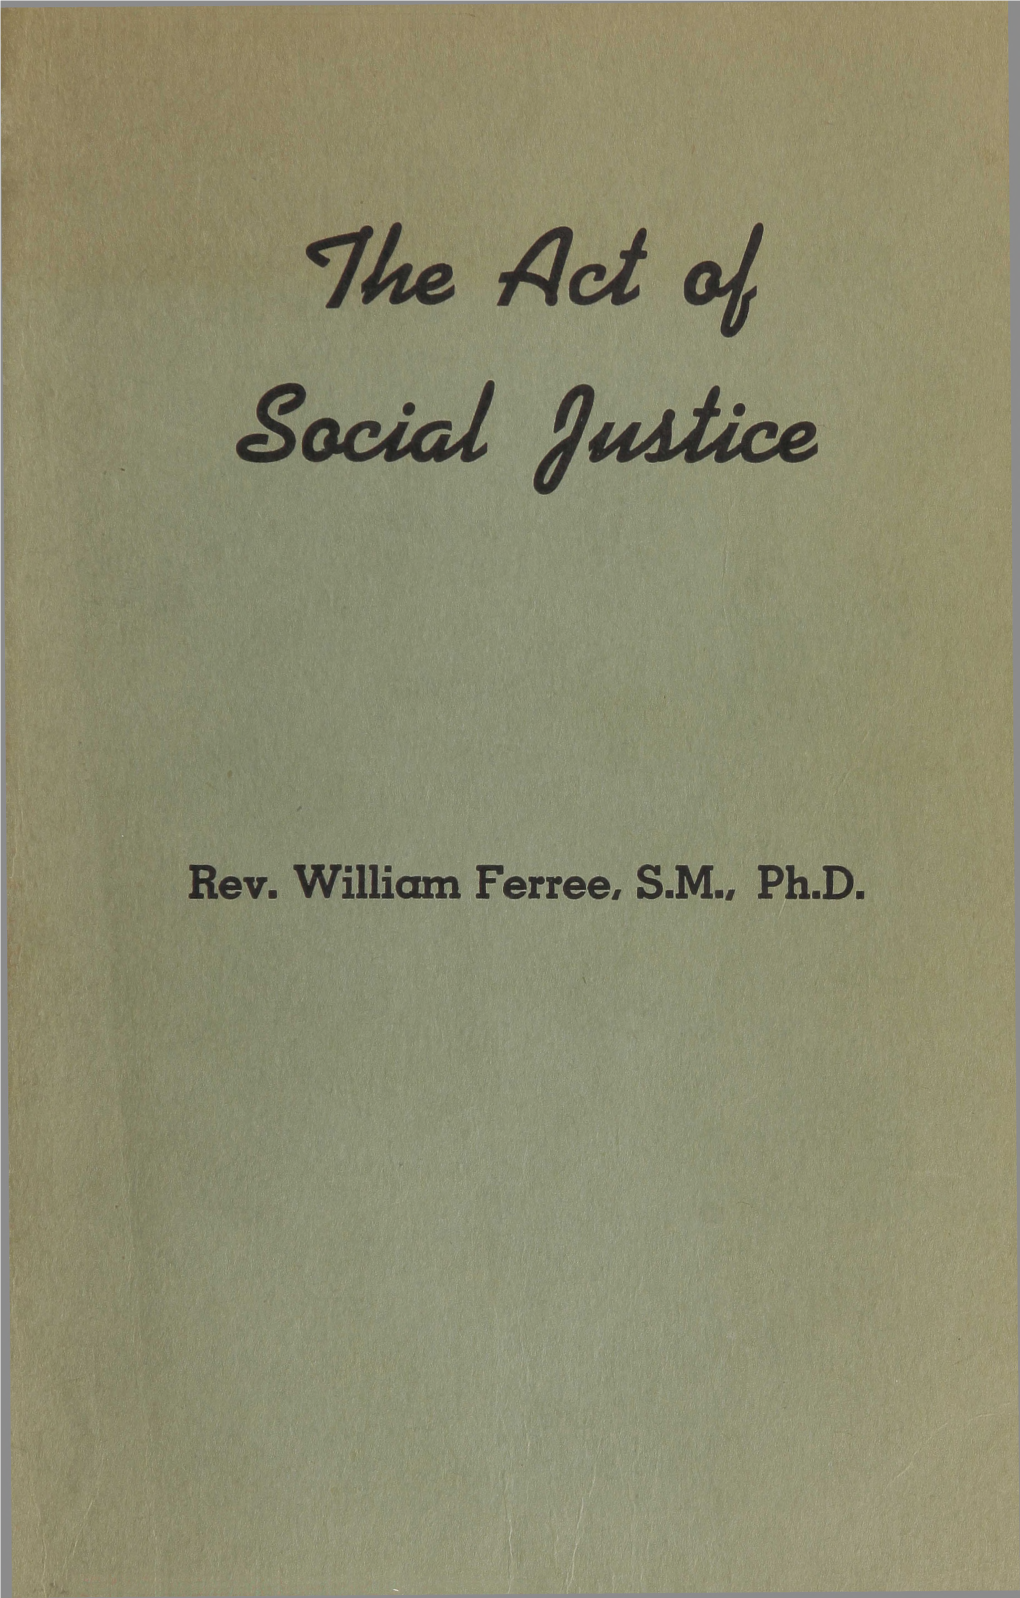 The Act of Social Justice in Its Four Causes 194 1